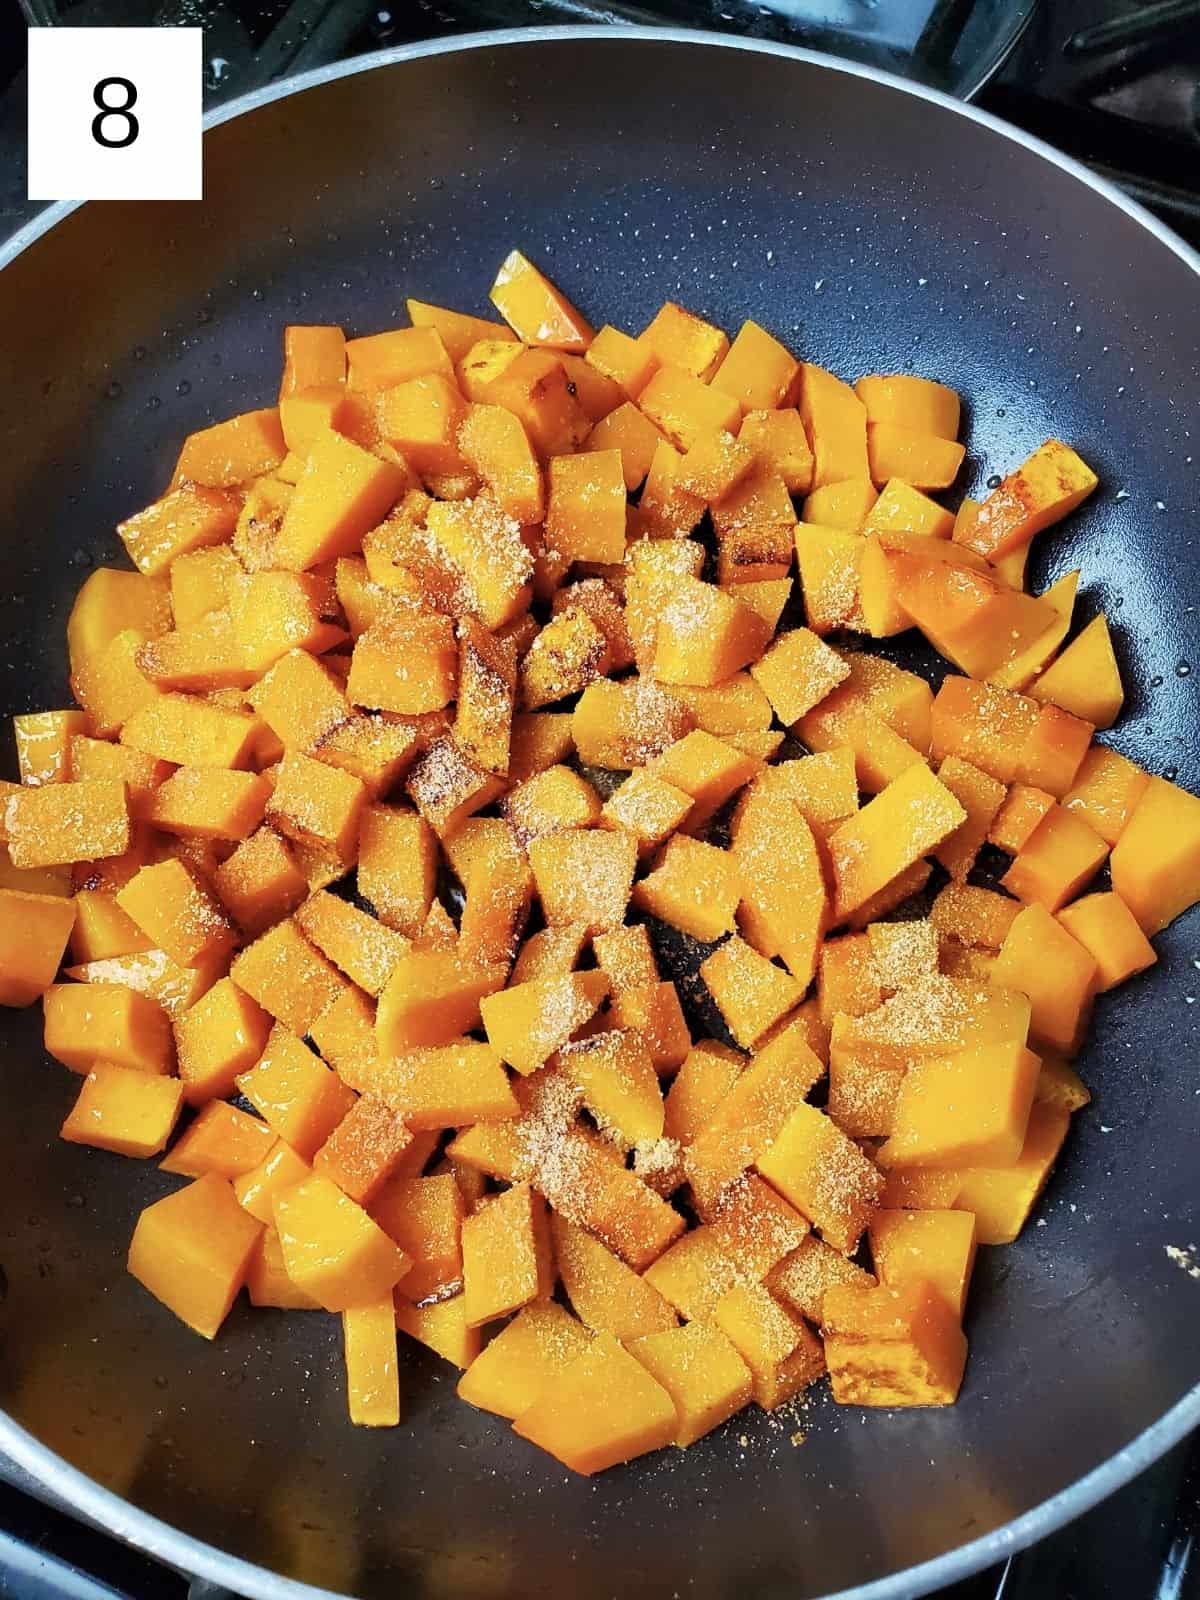 soften butternut squash cubes, sprinkled with garlic powder and salt, on a heated pan.